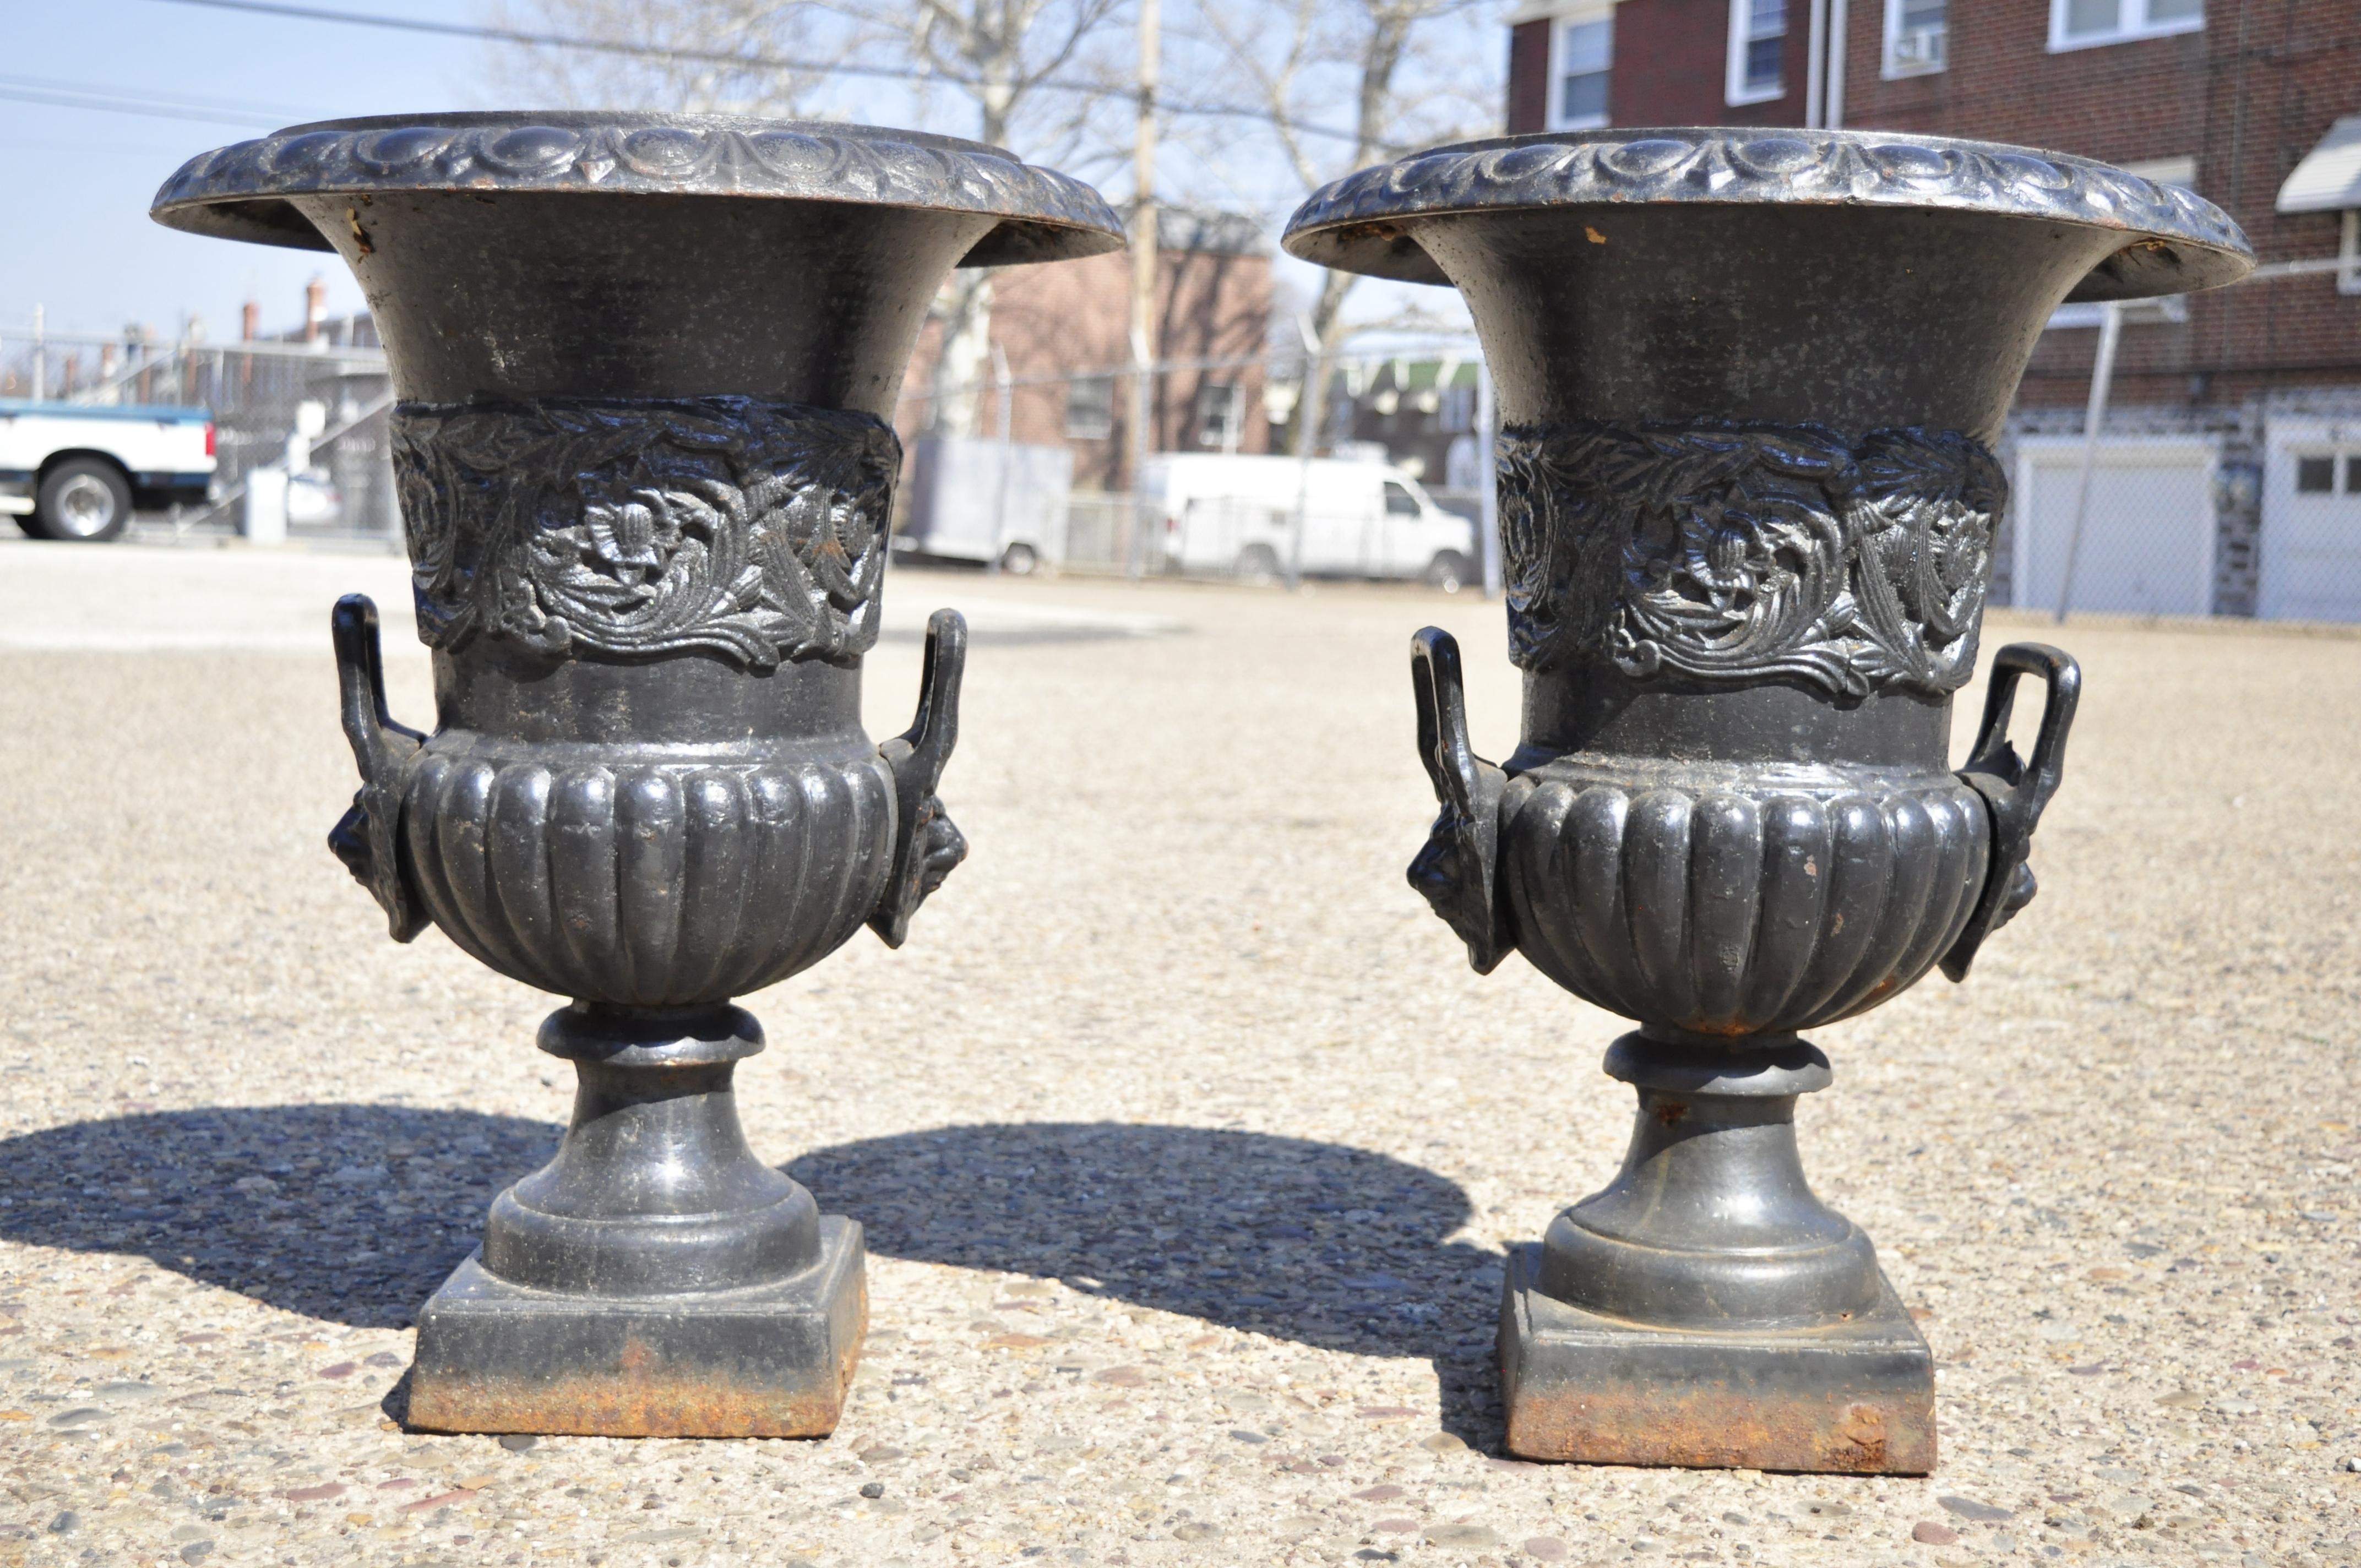 Vintage classical cast iron figural urn garden planter pots with lions and foliate - a pair. Item features lion form handles, leafy scrollwork, heavy cast iron construction. Circa mid 20th century. Measurements: 24